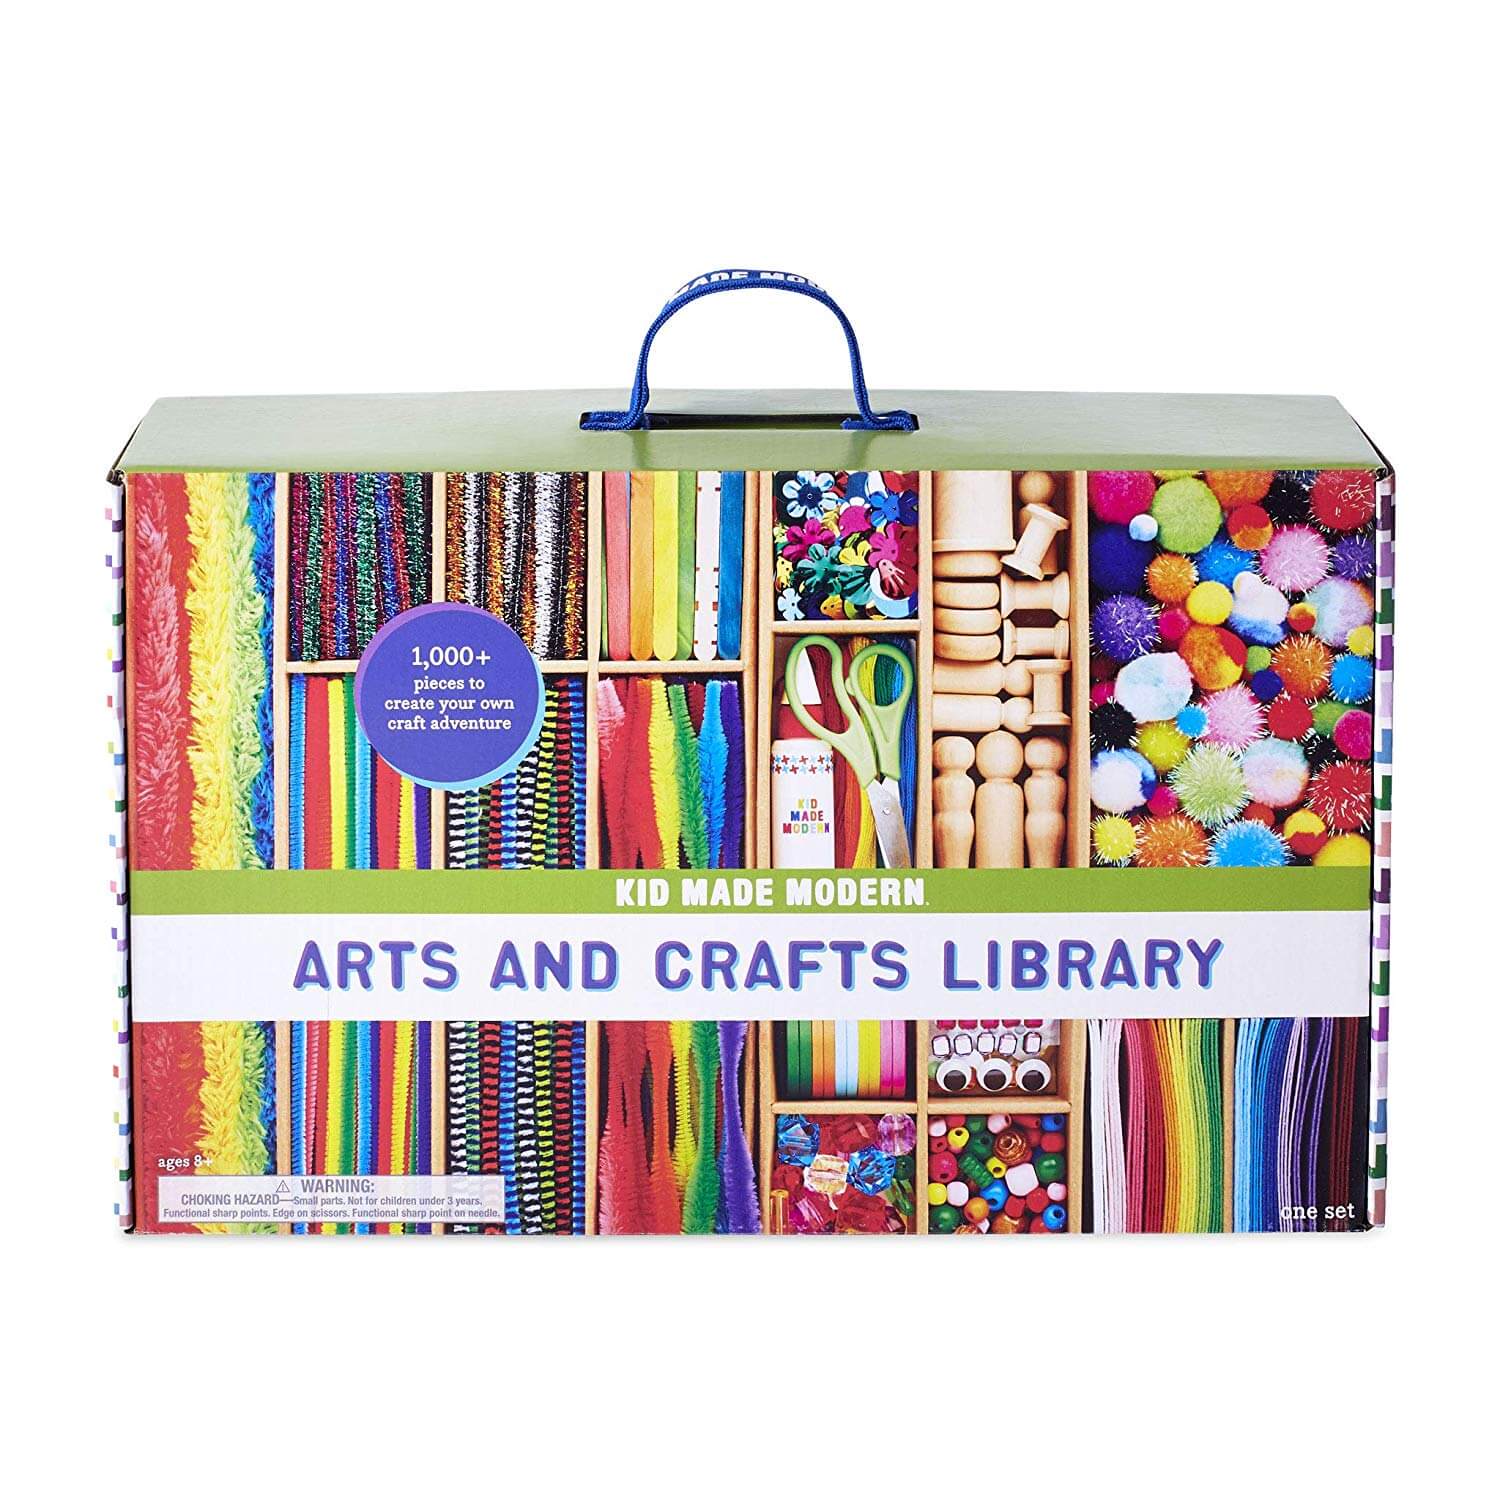 Kid Made Modern New Arts and Crafts Library Set